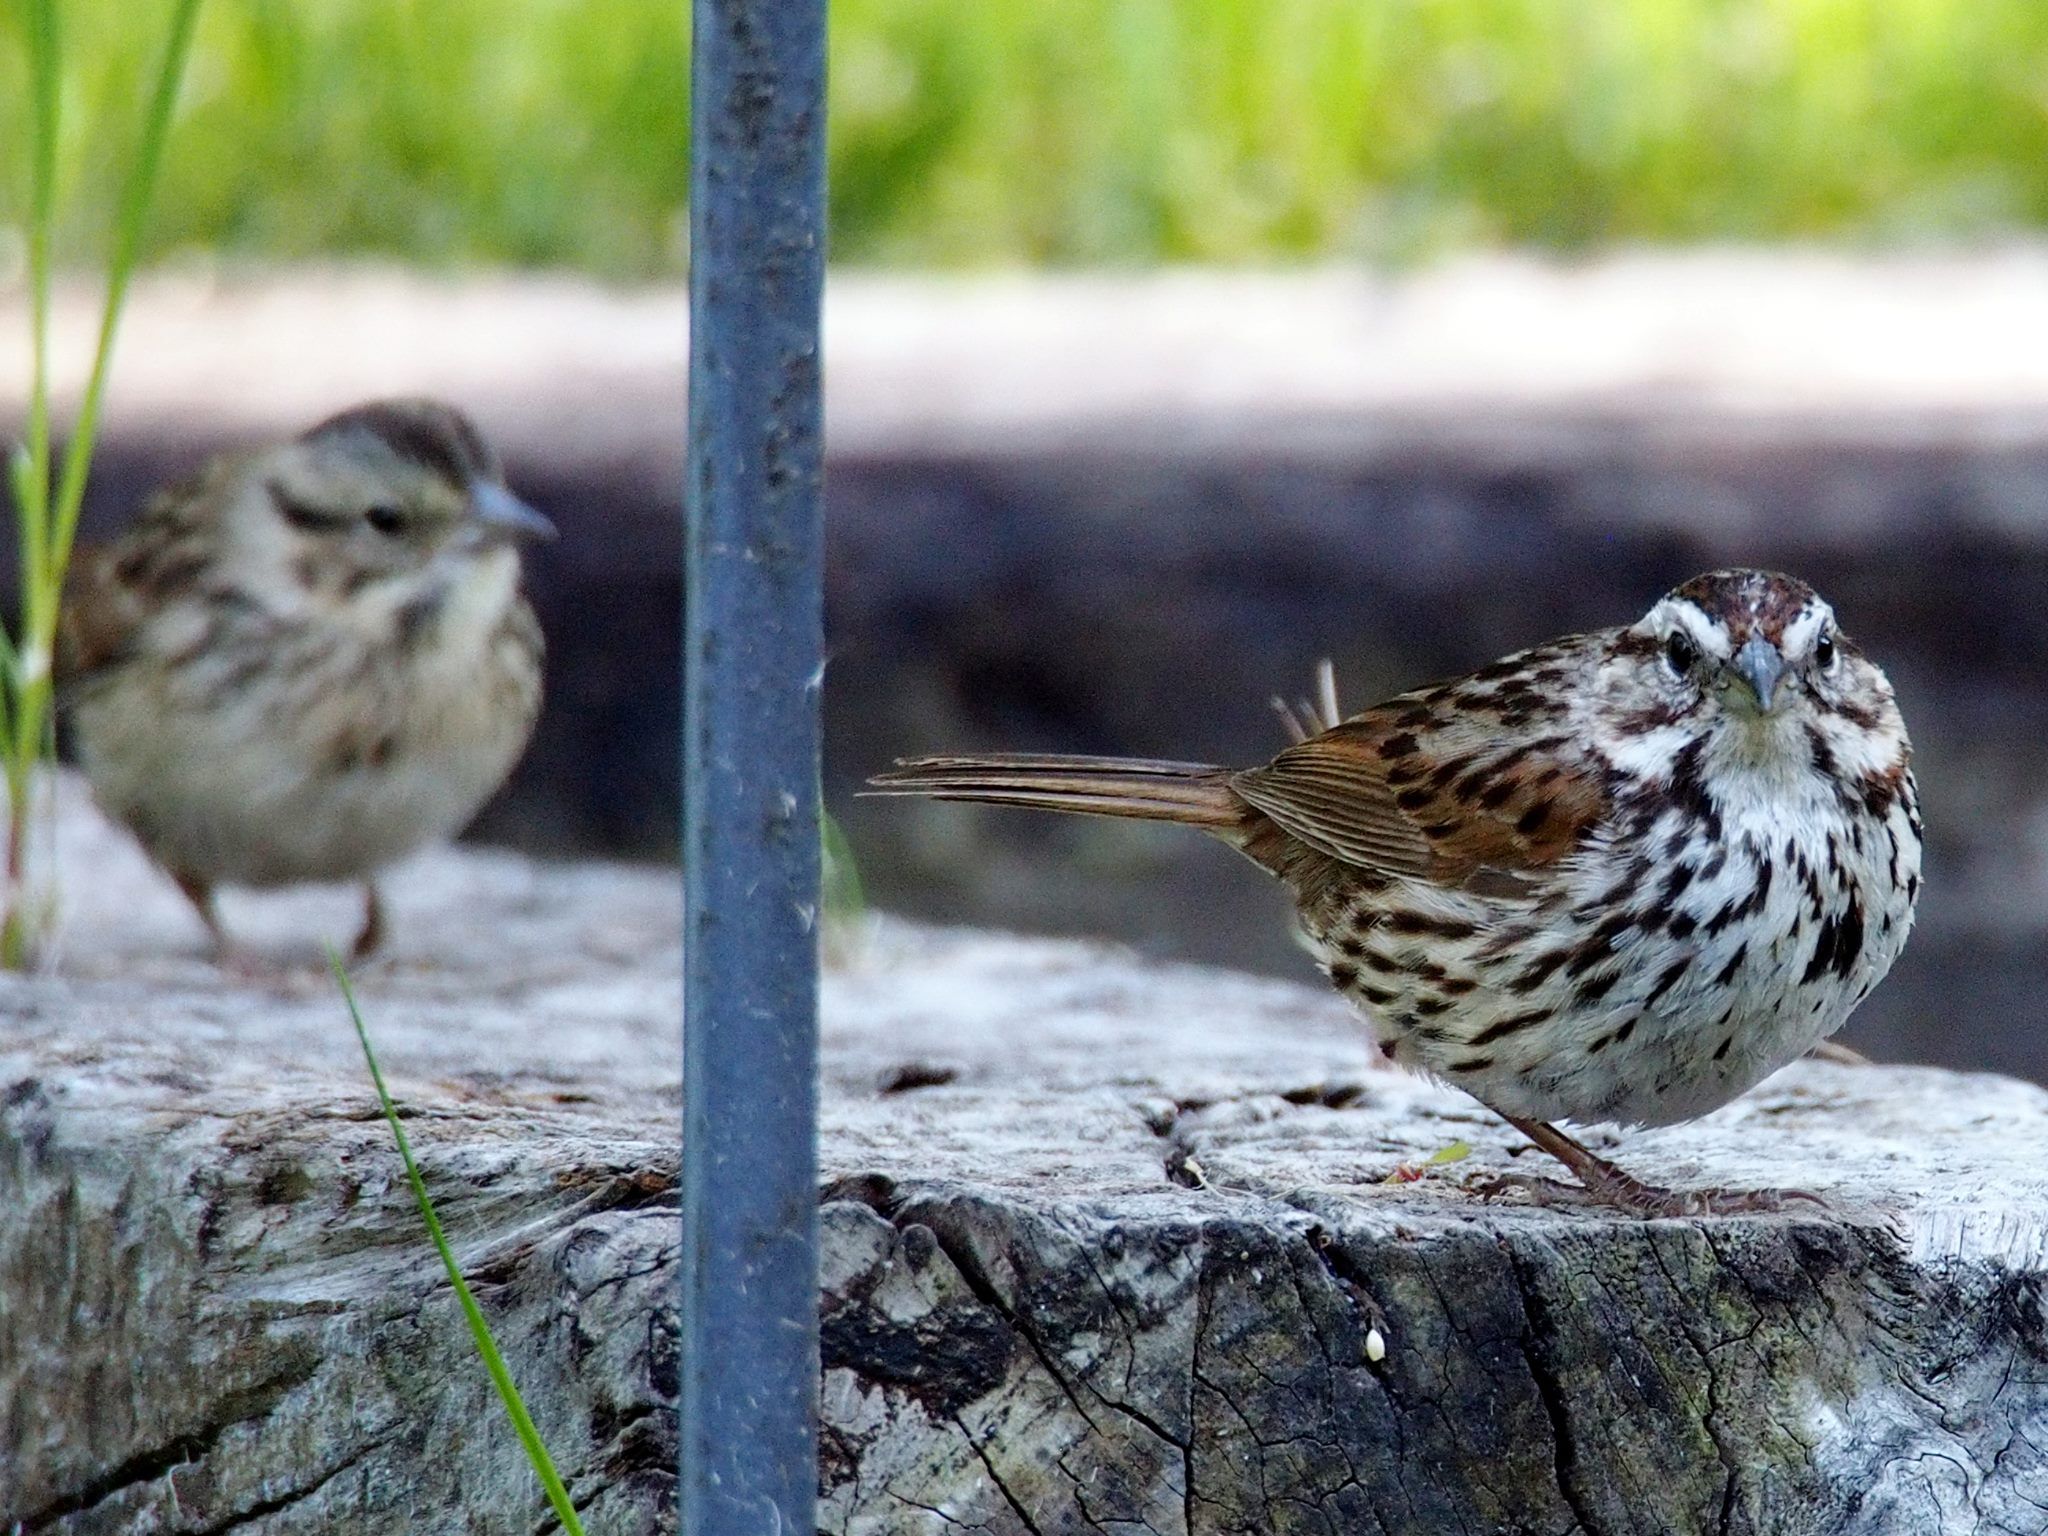 One-legged song sparrow with chick in the background